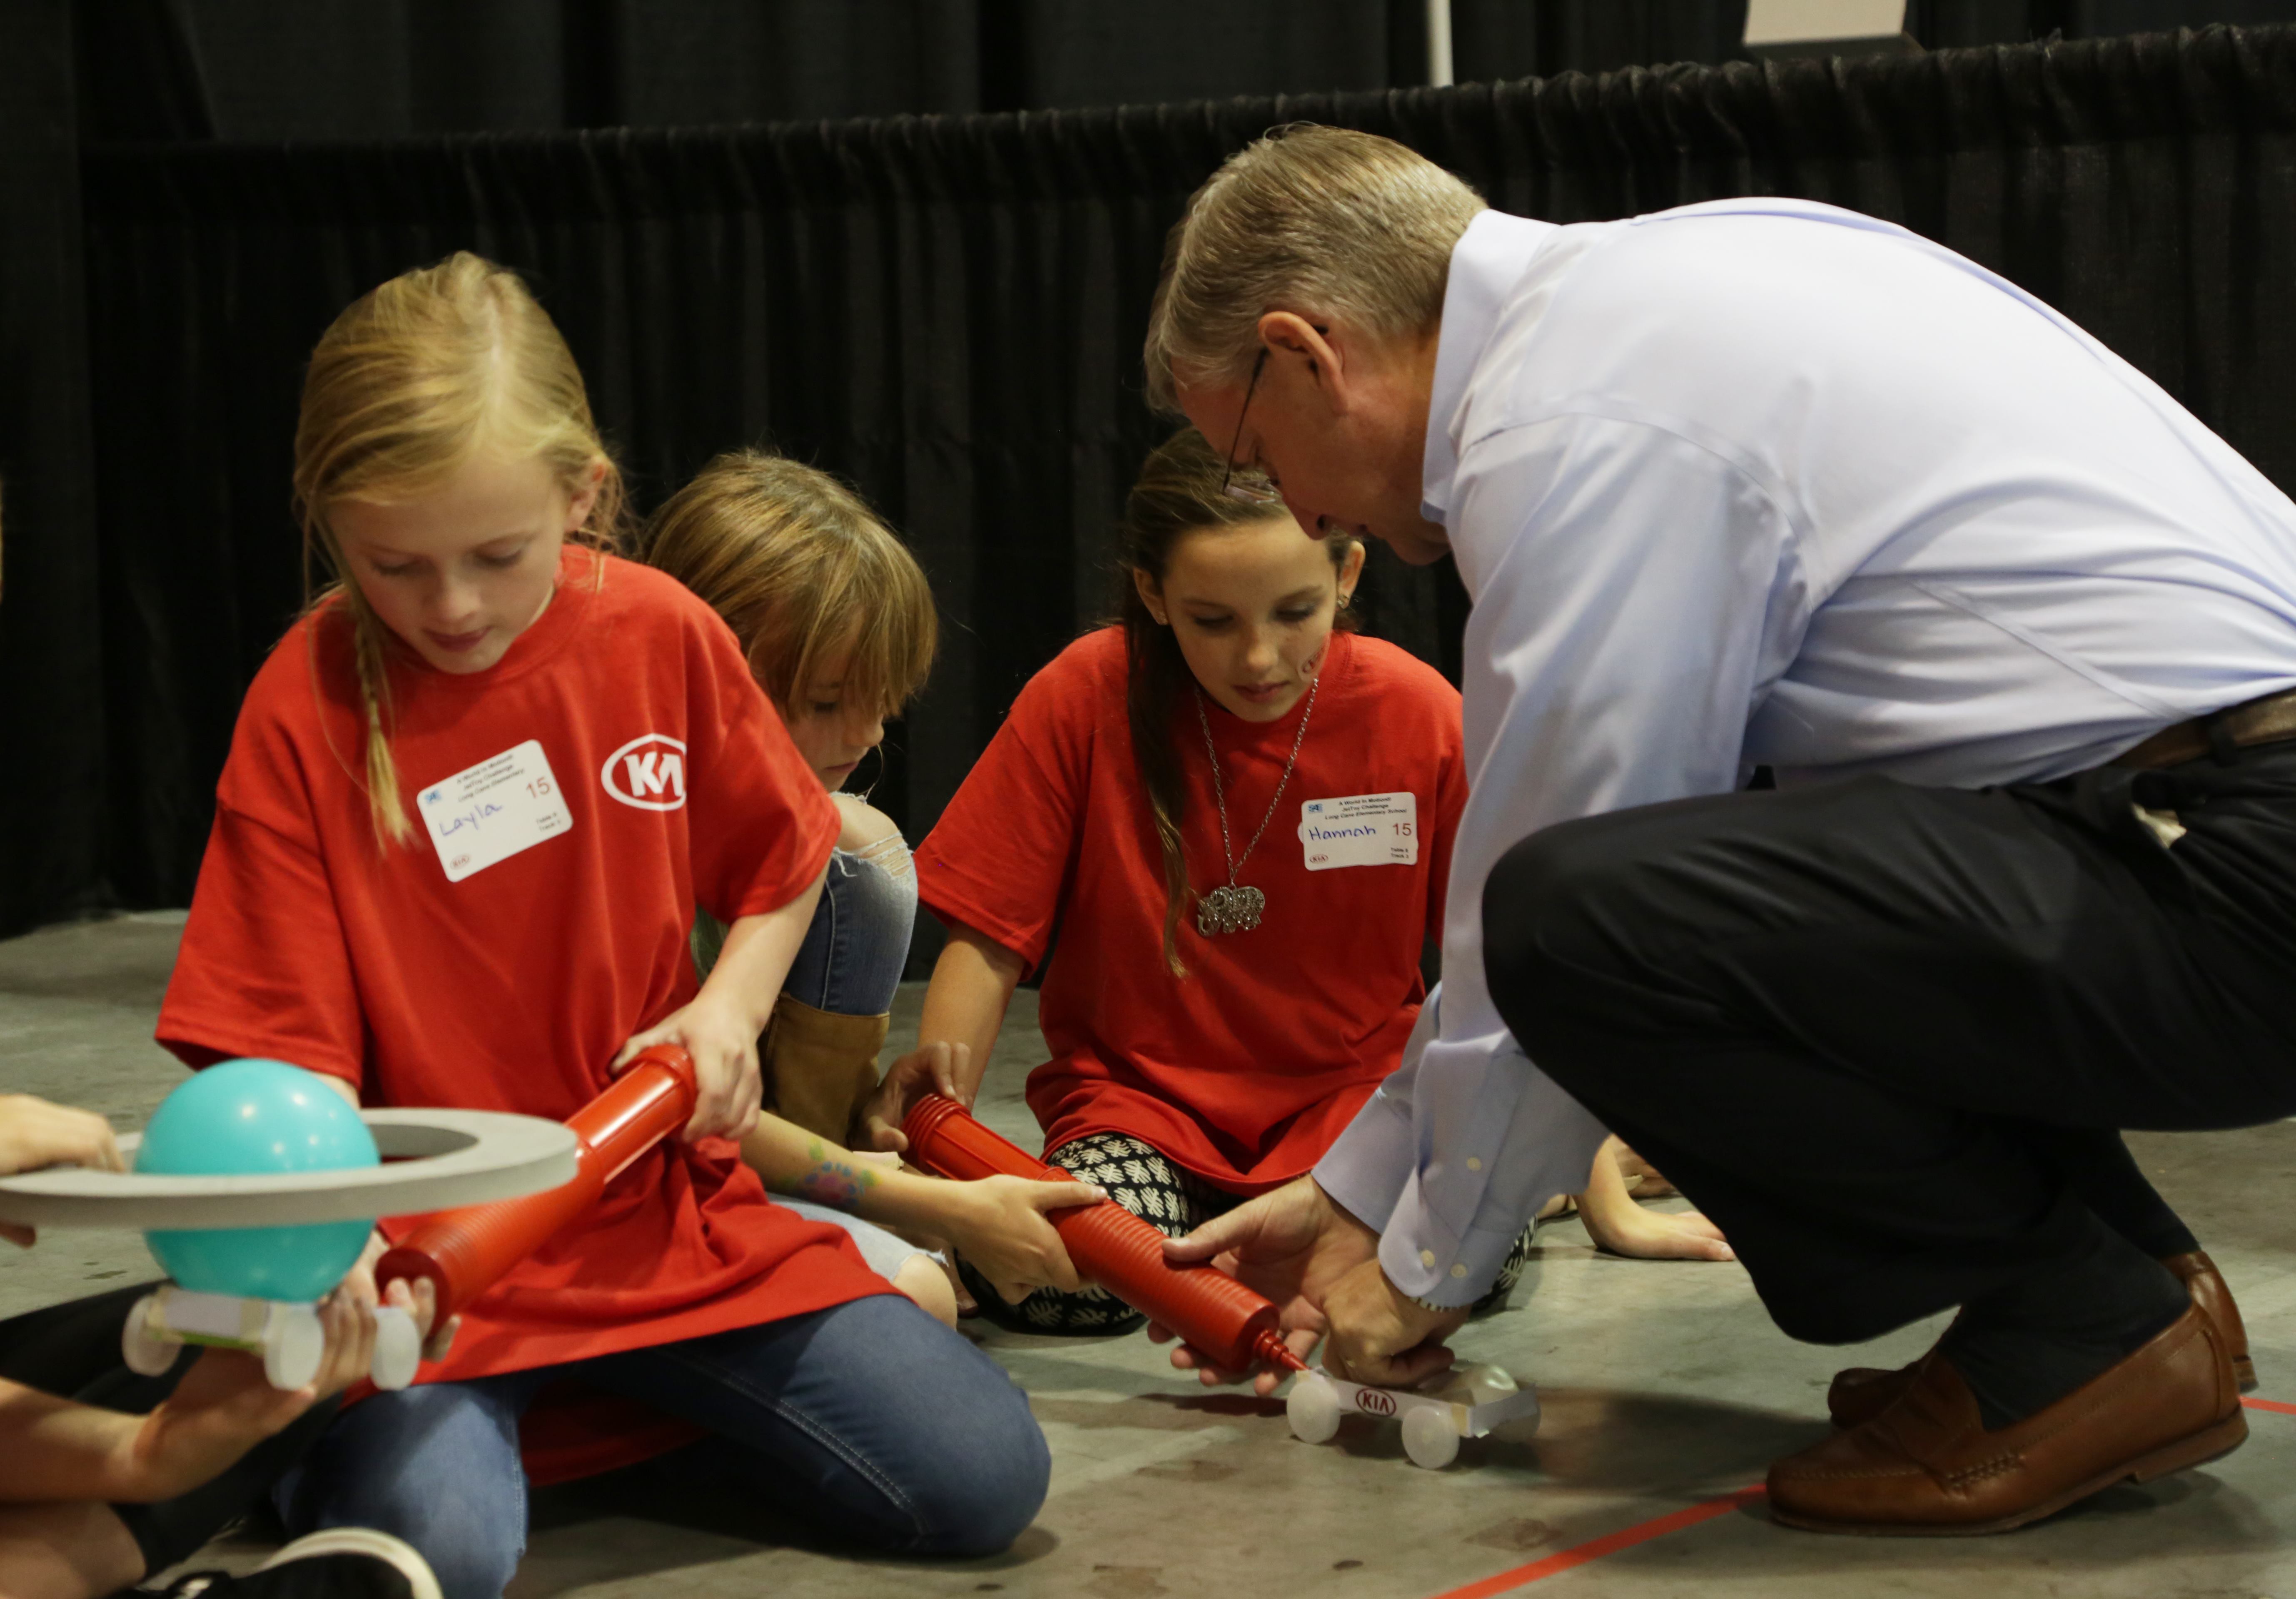 Students from Long Cane Elementary in Troup Co. prepare to launch their JetToy with guidance from Stuart C. Countess, CAO, KMMG.